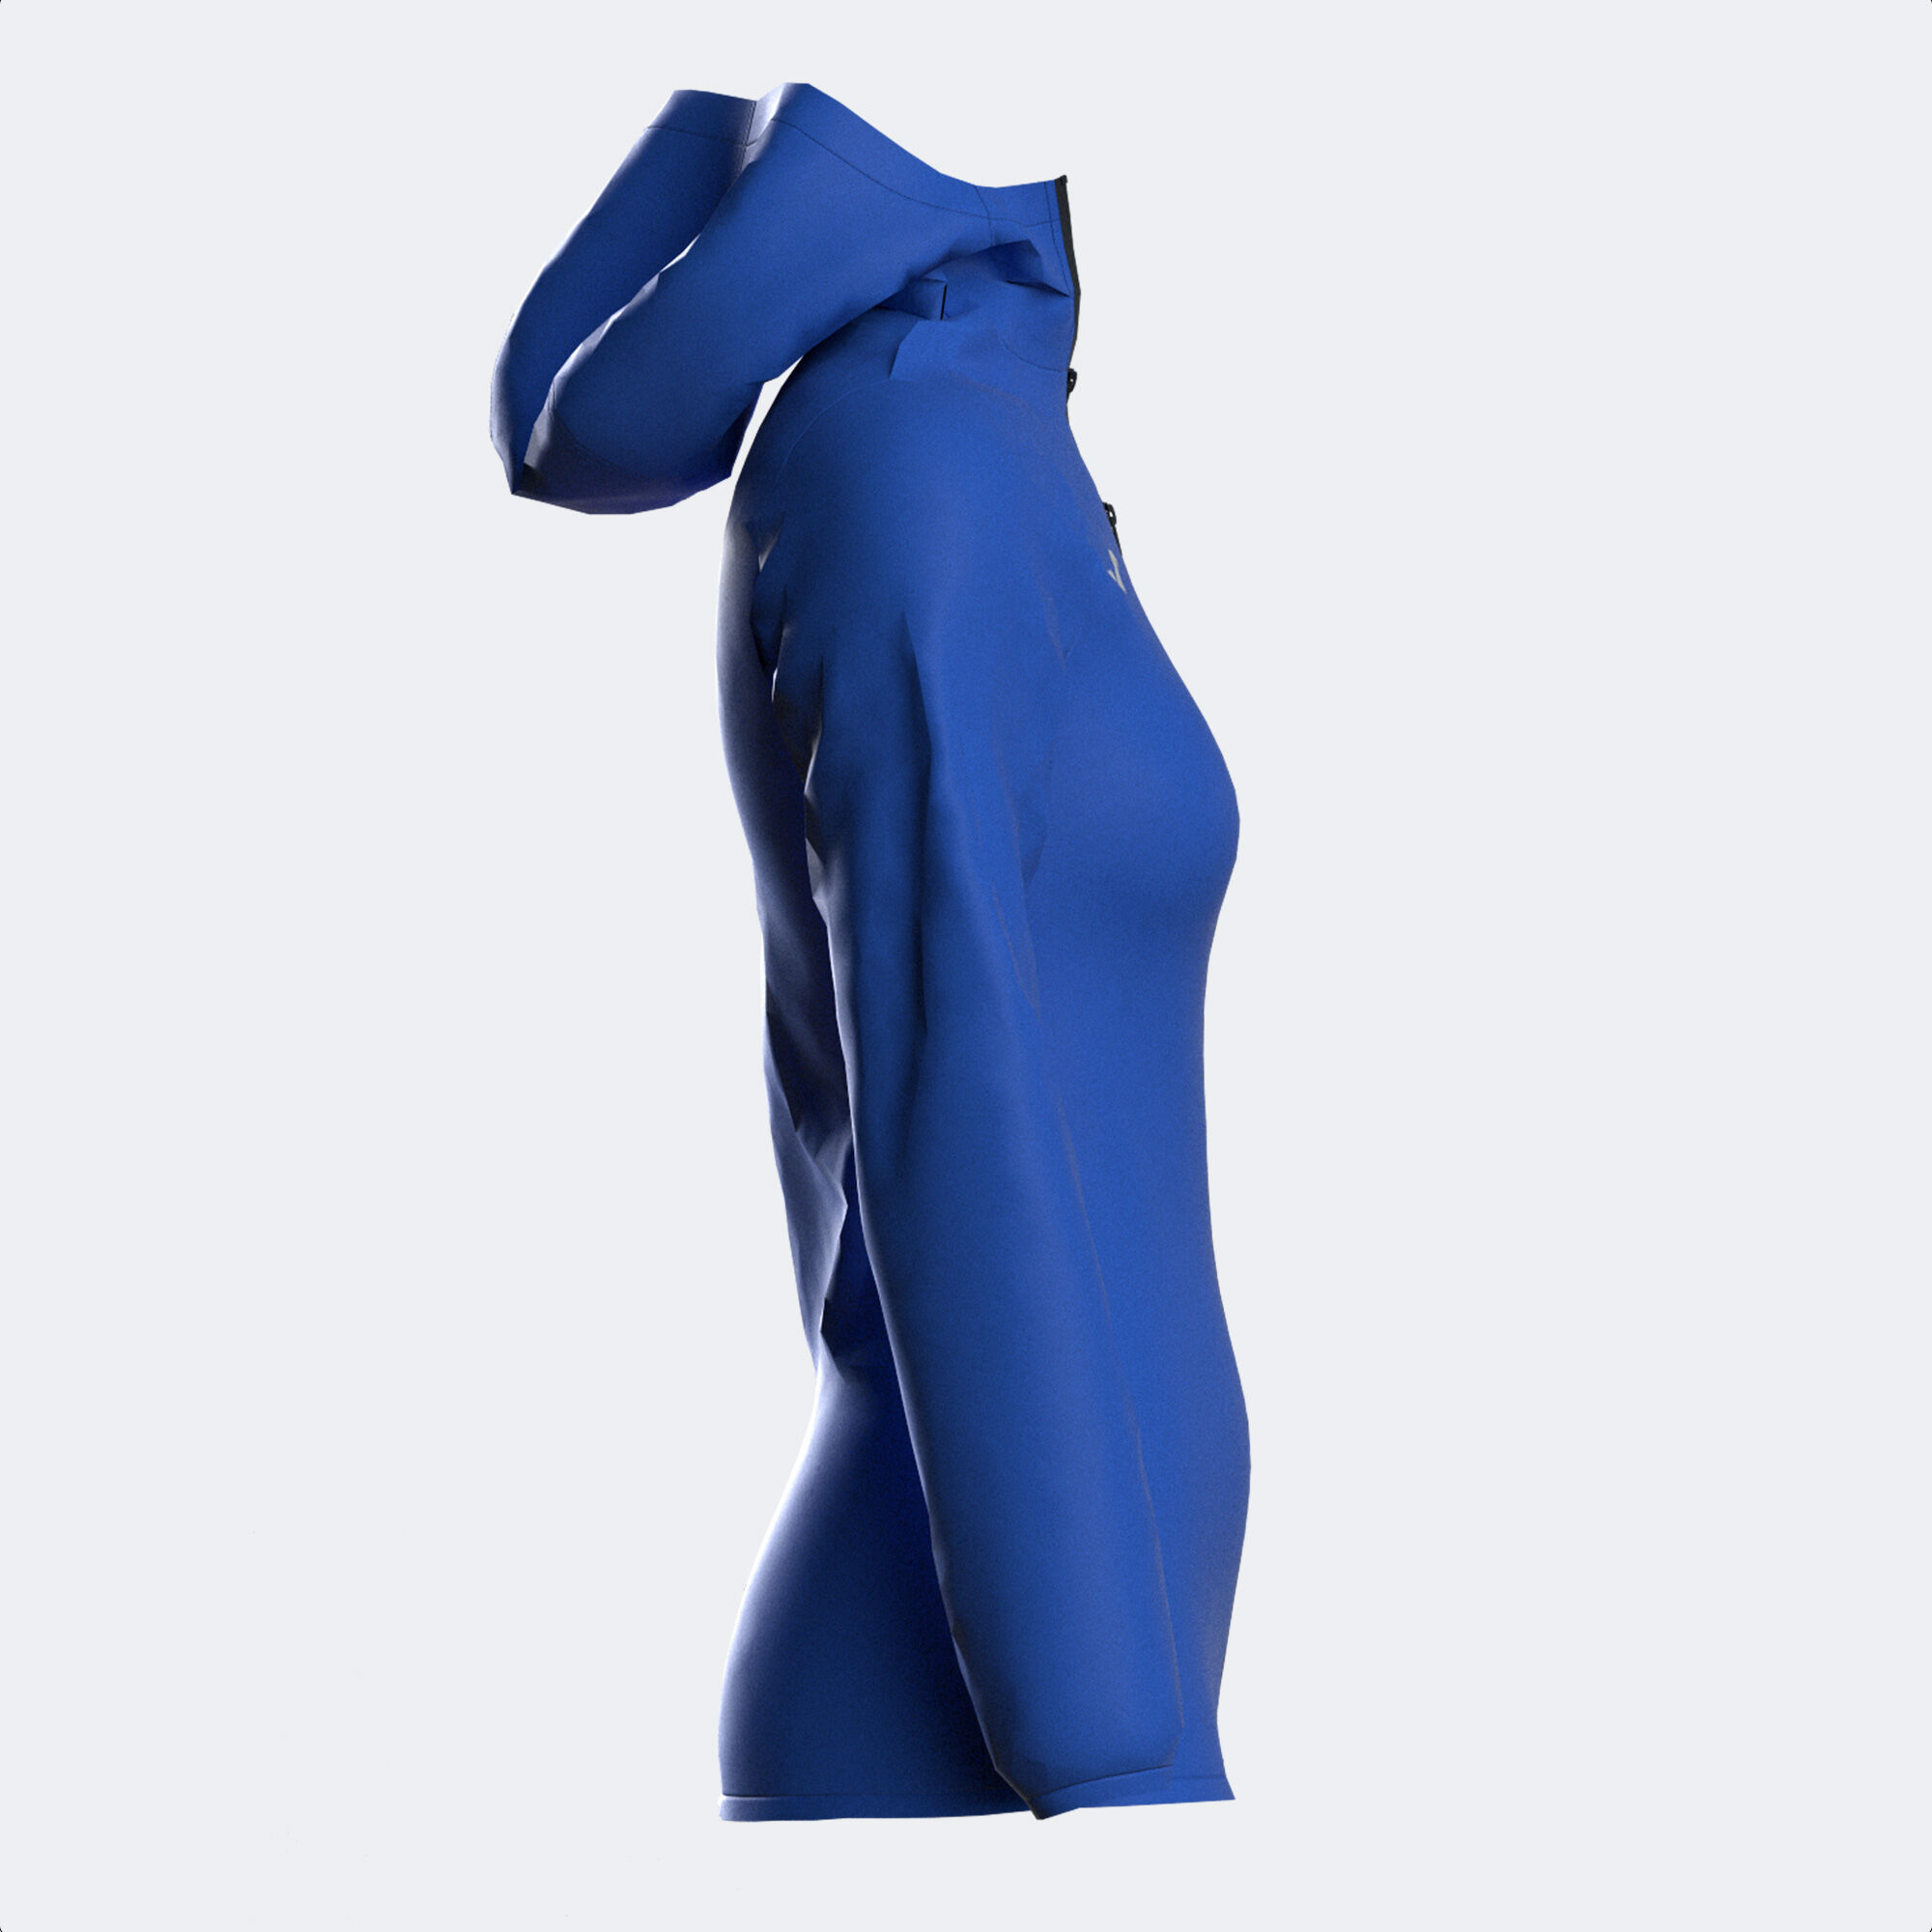 GIACCA A VENTO DONNA R-TRAIL NATURE BLU REALE